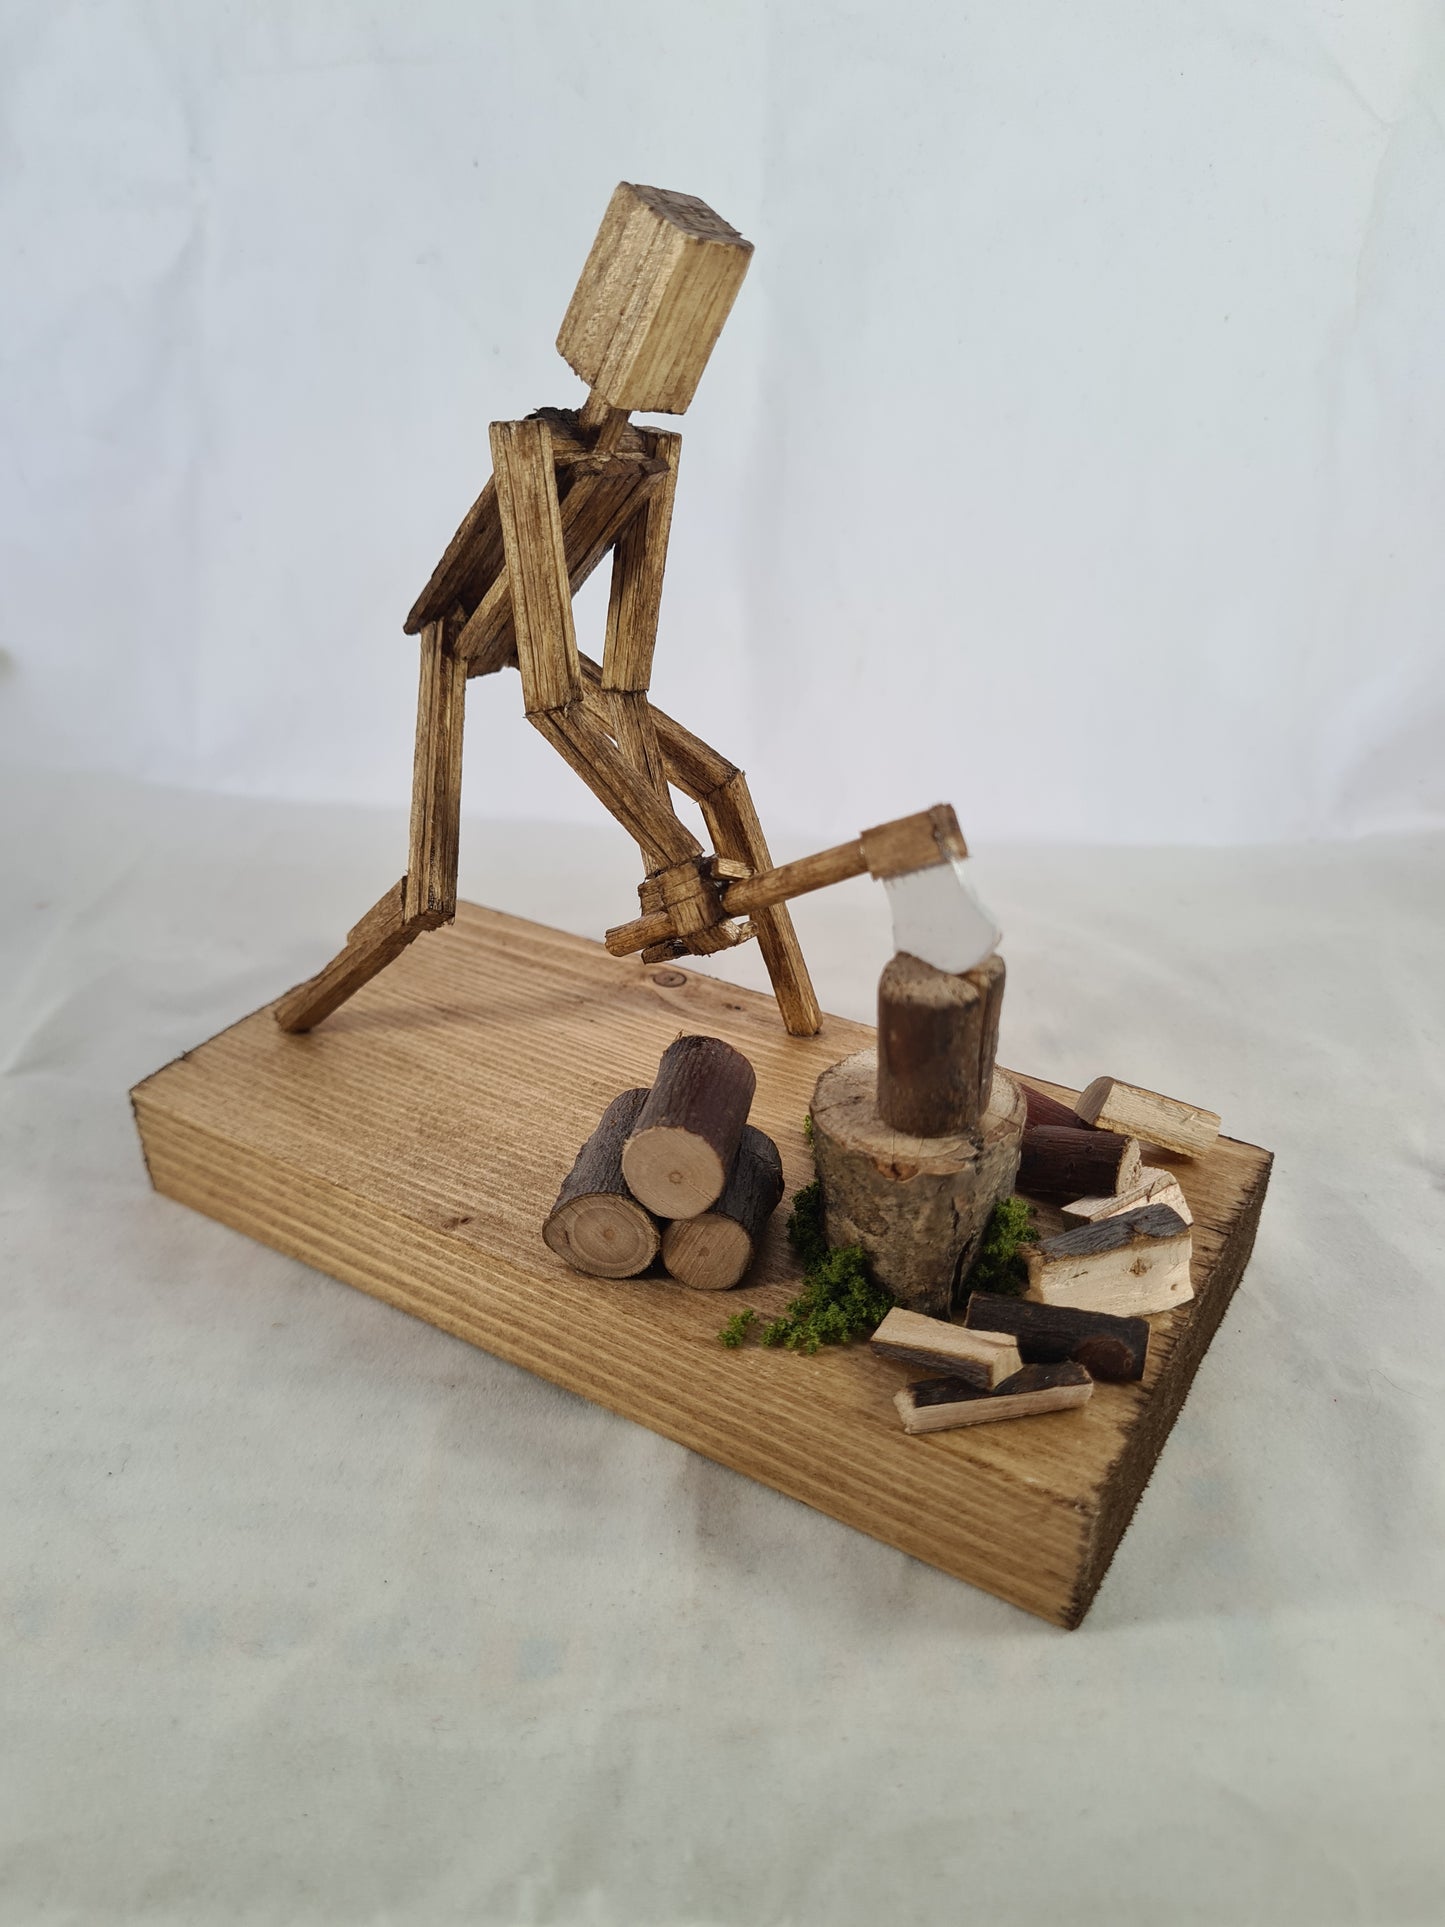 Lumberjack - Handcrafted Wooden Matchstick Figures - Gifts, Ornaments and Decor By Tiggidy Designs